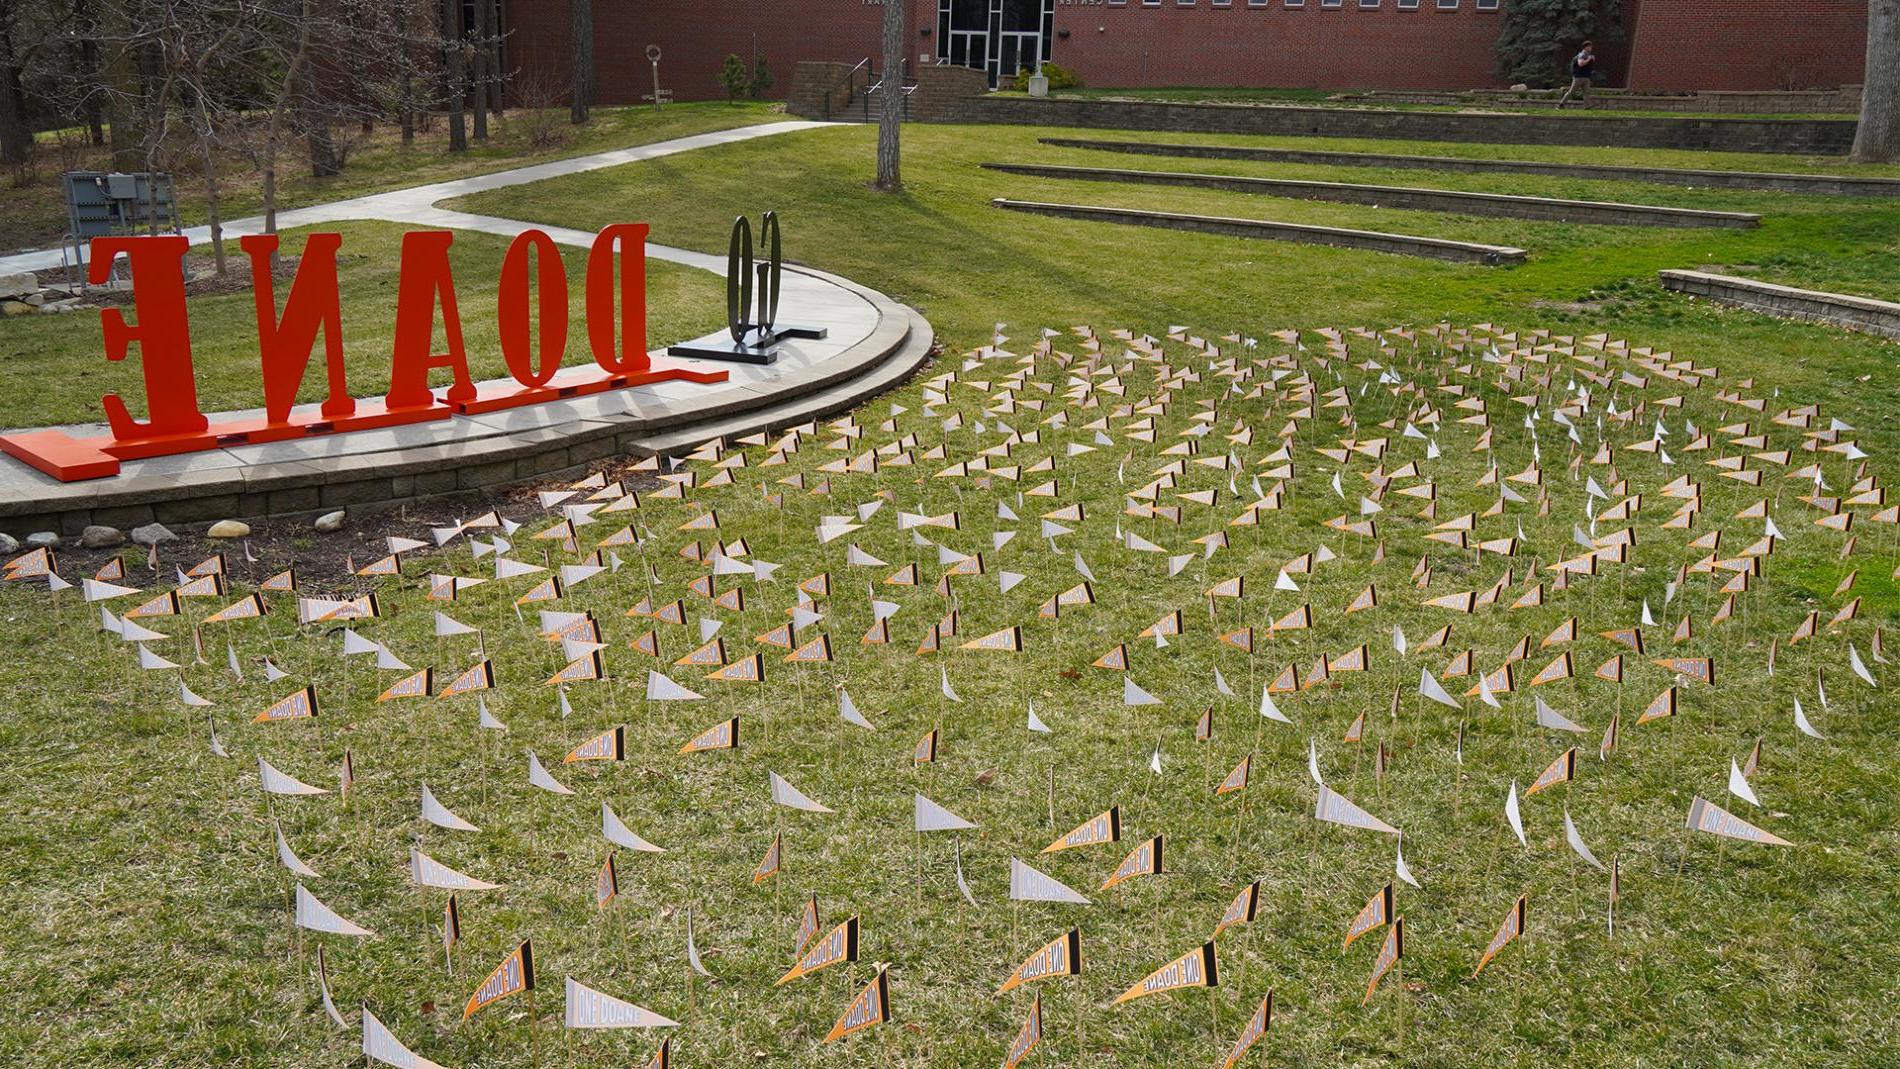 Cassel Outdoor Theatre on Doane’s 克里特岛 campus has nearly 700 orange pennants on display atop the green grass. Giant letters reading G-O D-O-A-N-E can be seen near the pennants. 